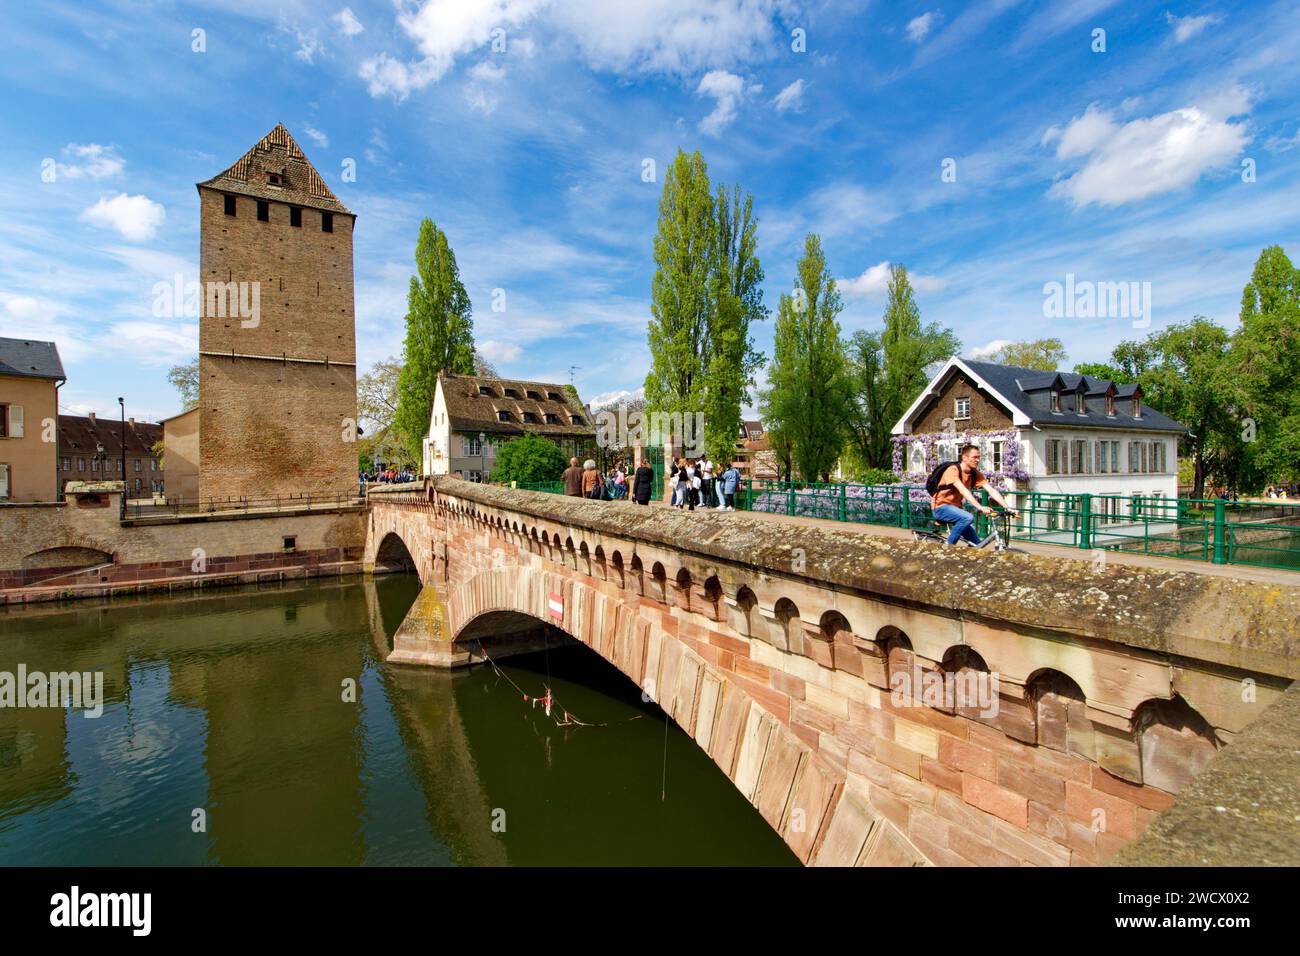 France, Bas Rhin, Strasbourg, old town listed as World Heritage by UNESCO, the Covered Bridges over the River Ill Stock Photo